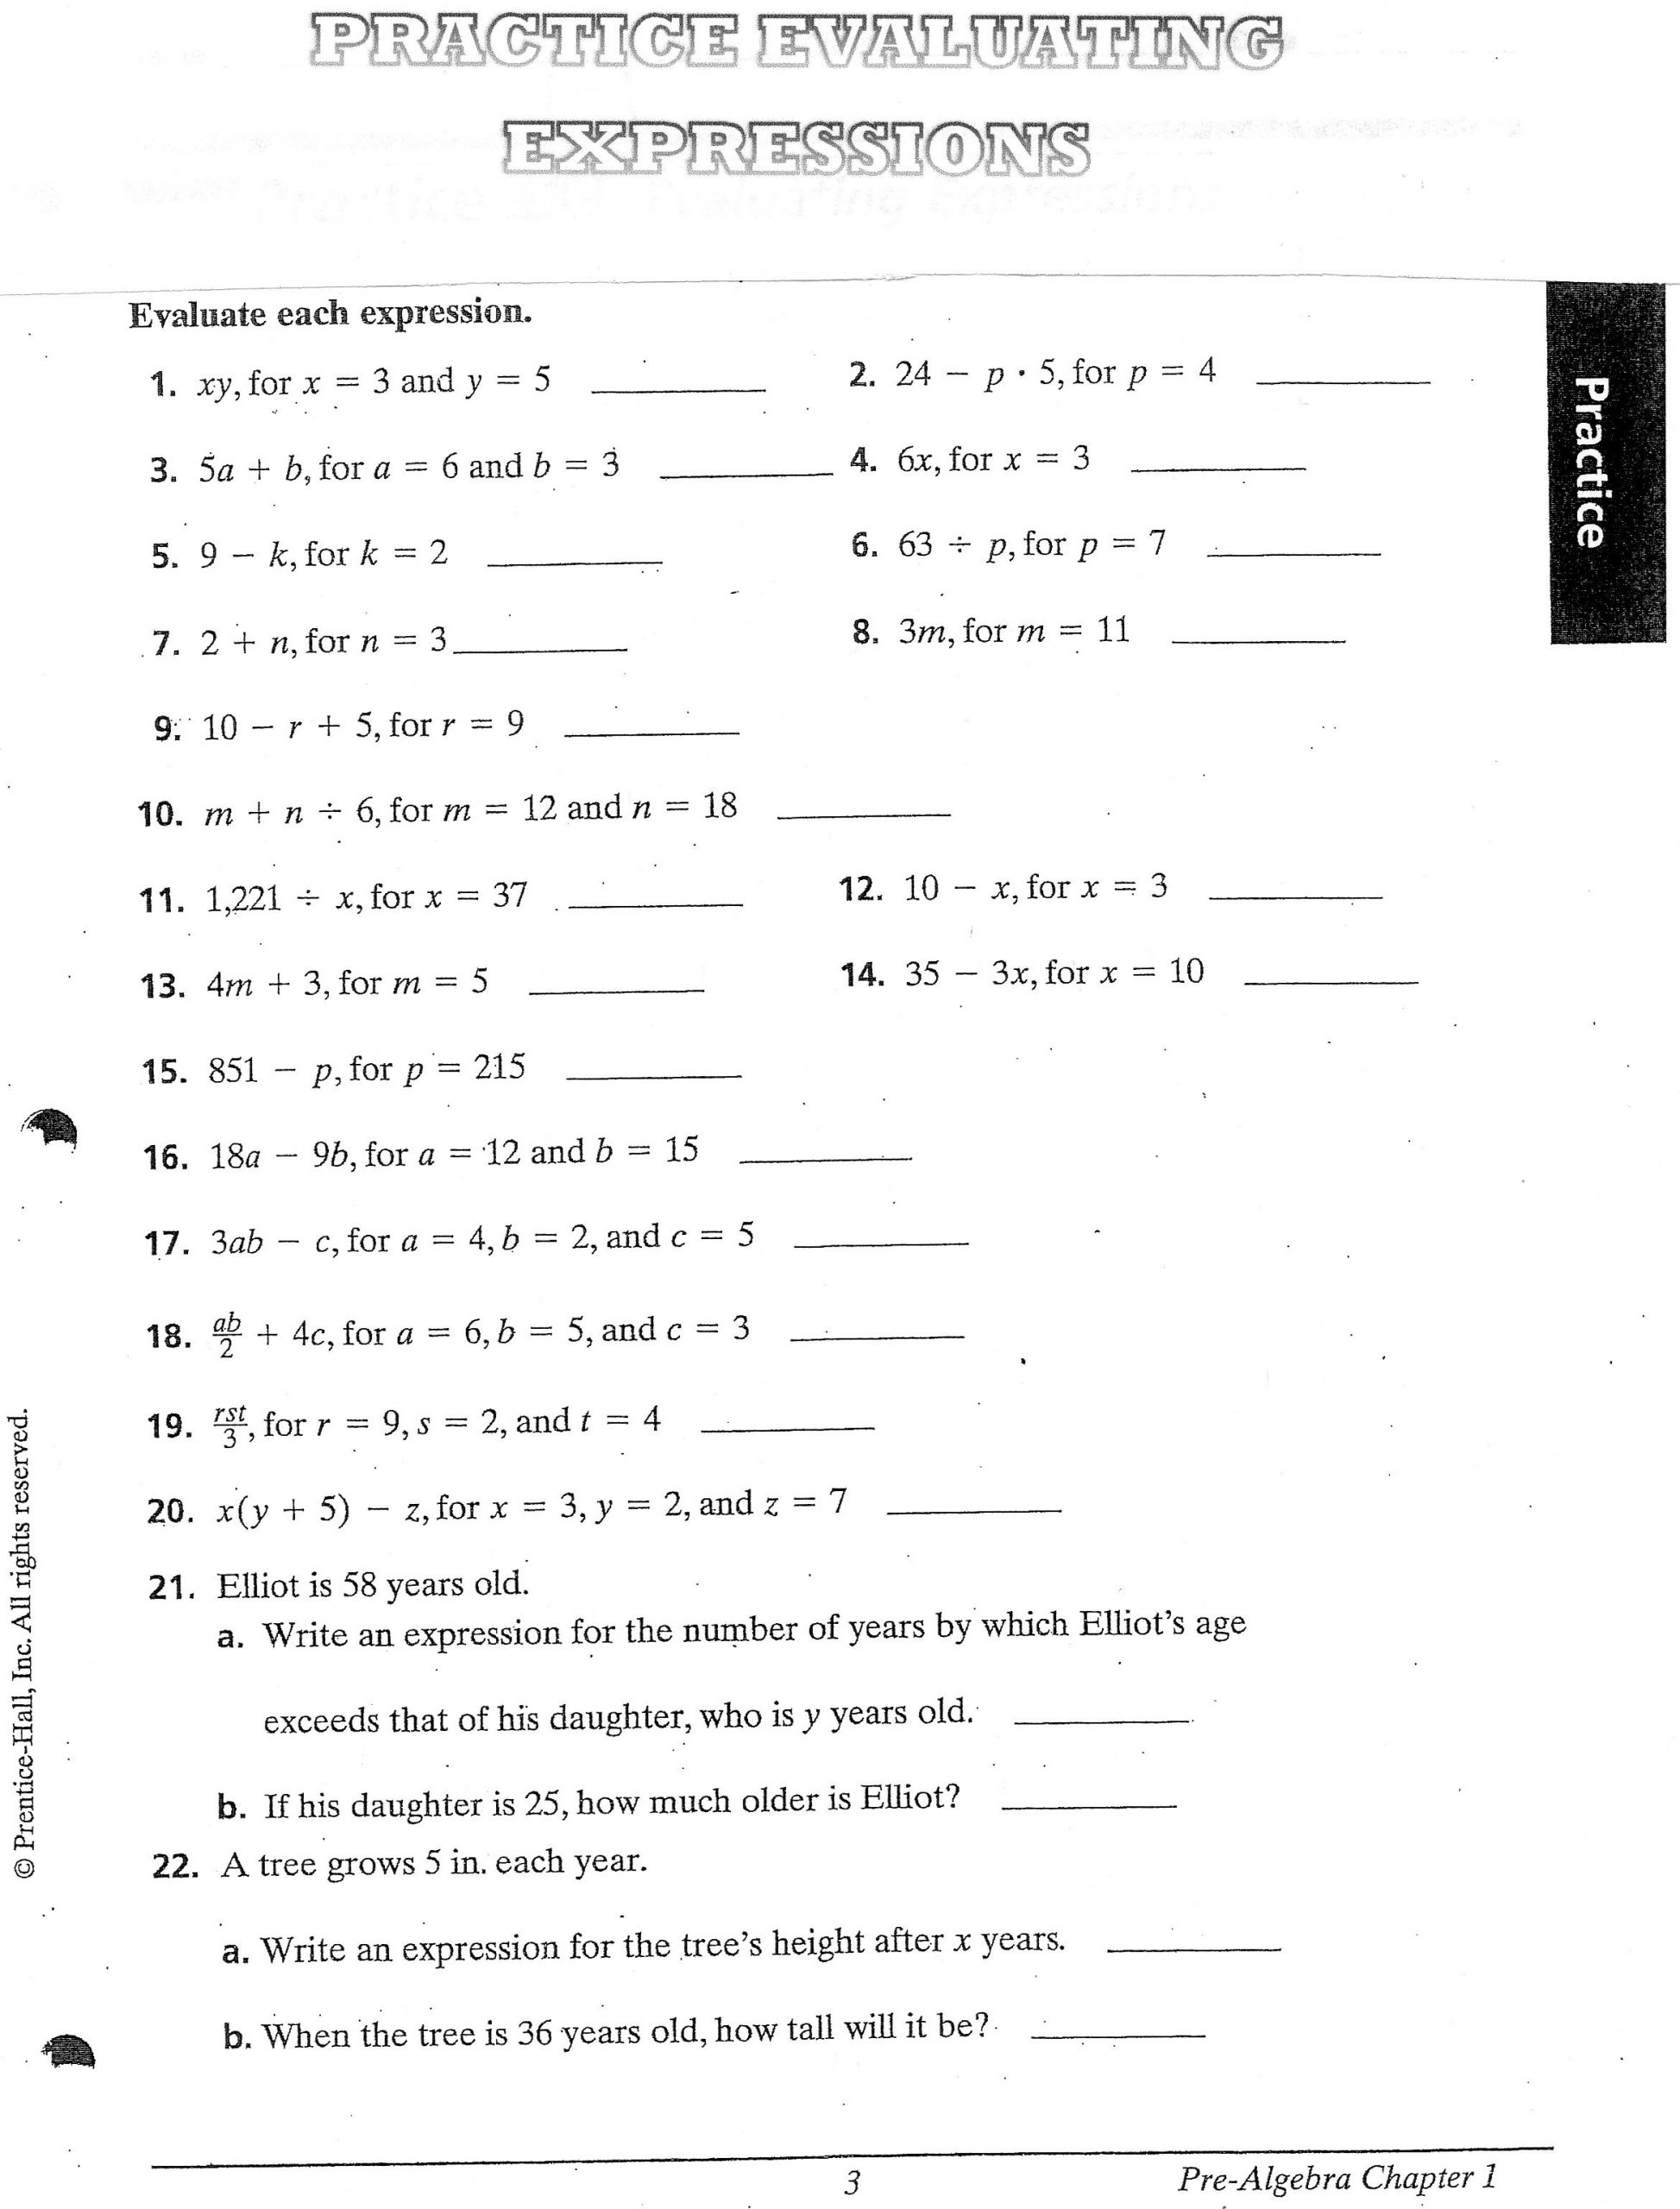 mixed practice worksheet easy math questions multiplication games printable grade exam counting patterns worksheets word problems ks2 free for 1st mental arithmetic year 4th tutor